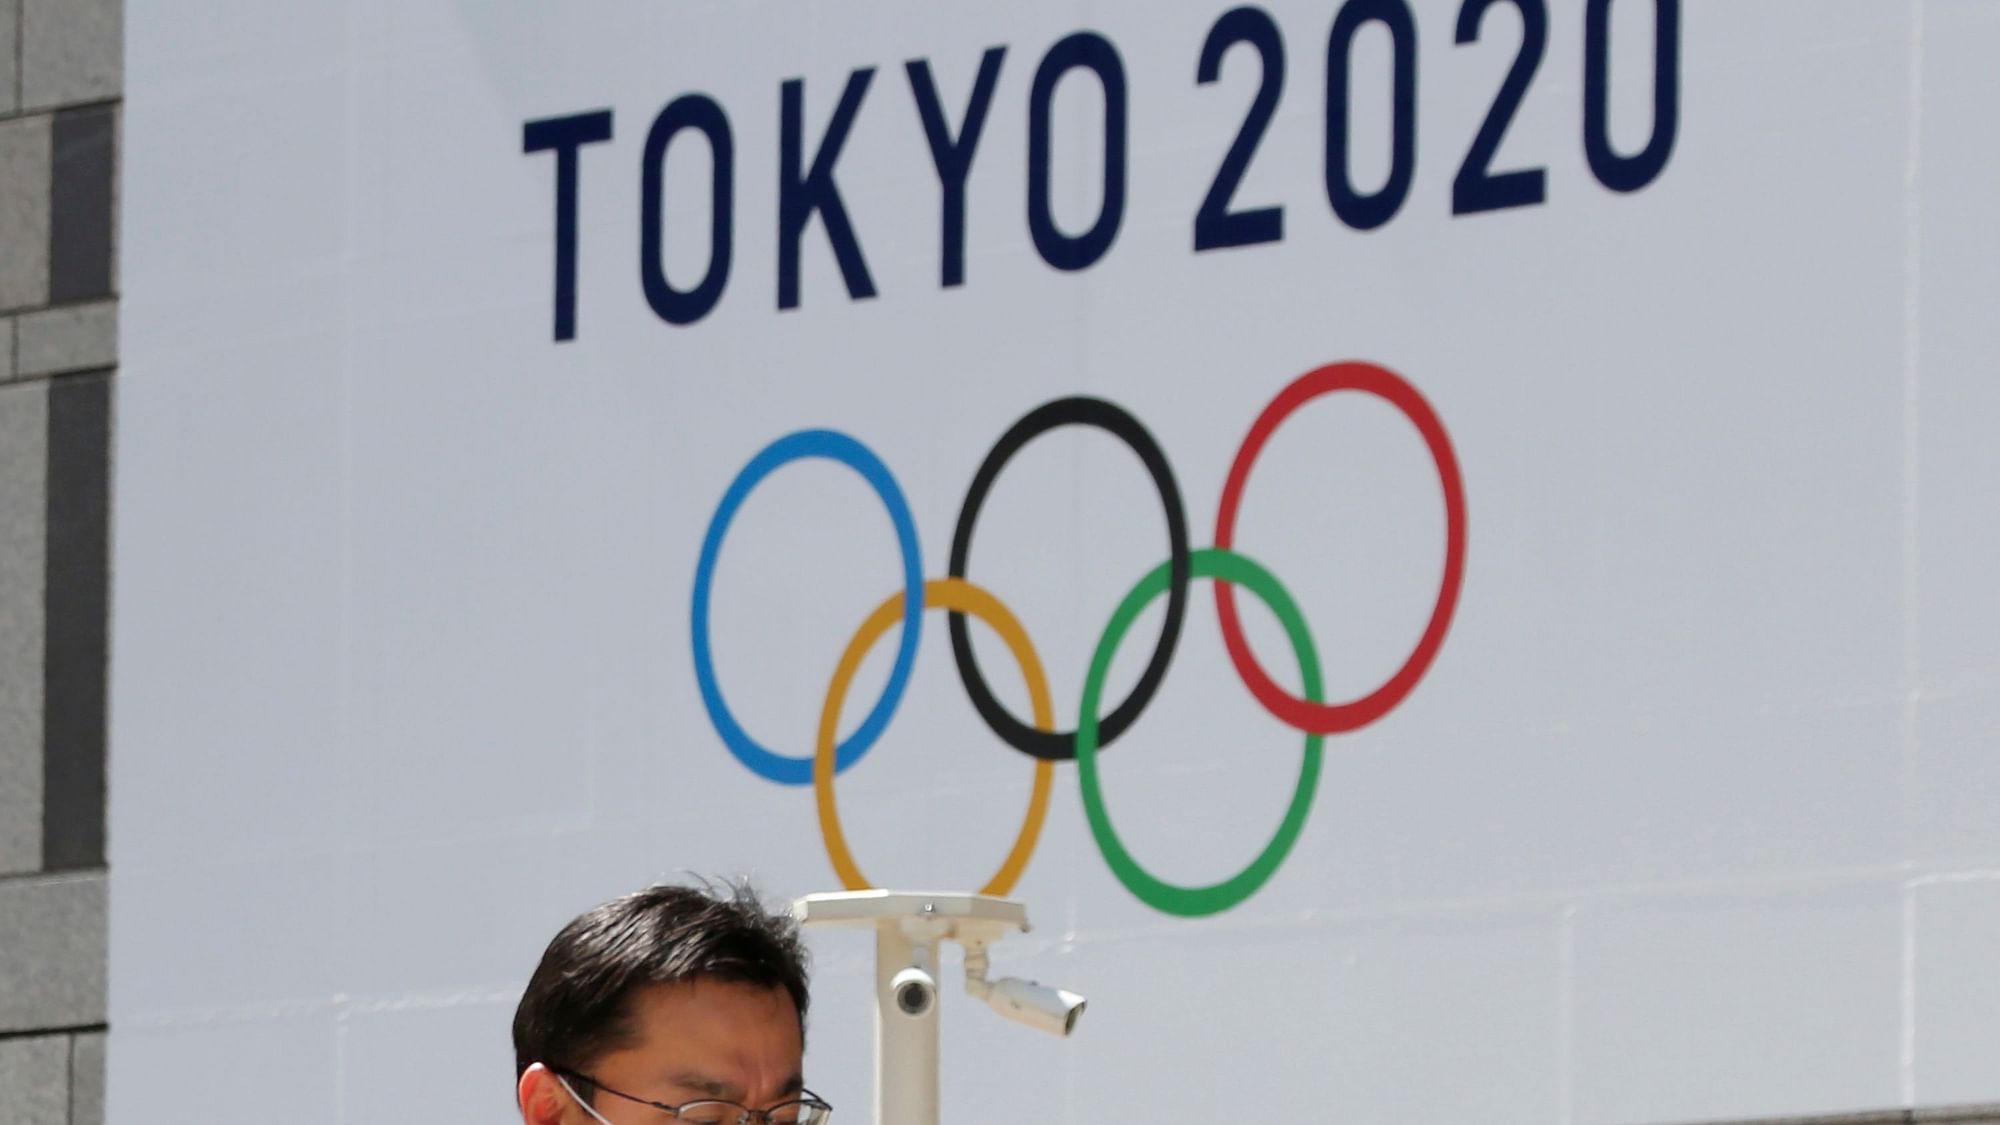 The new date for the rescheduled Tokyo 2020 Olympic Games will be decided at the earliest possible in the next three weeks.